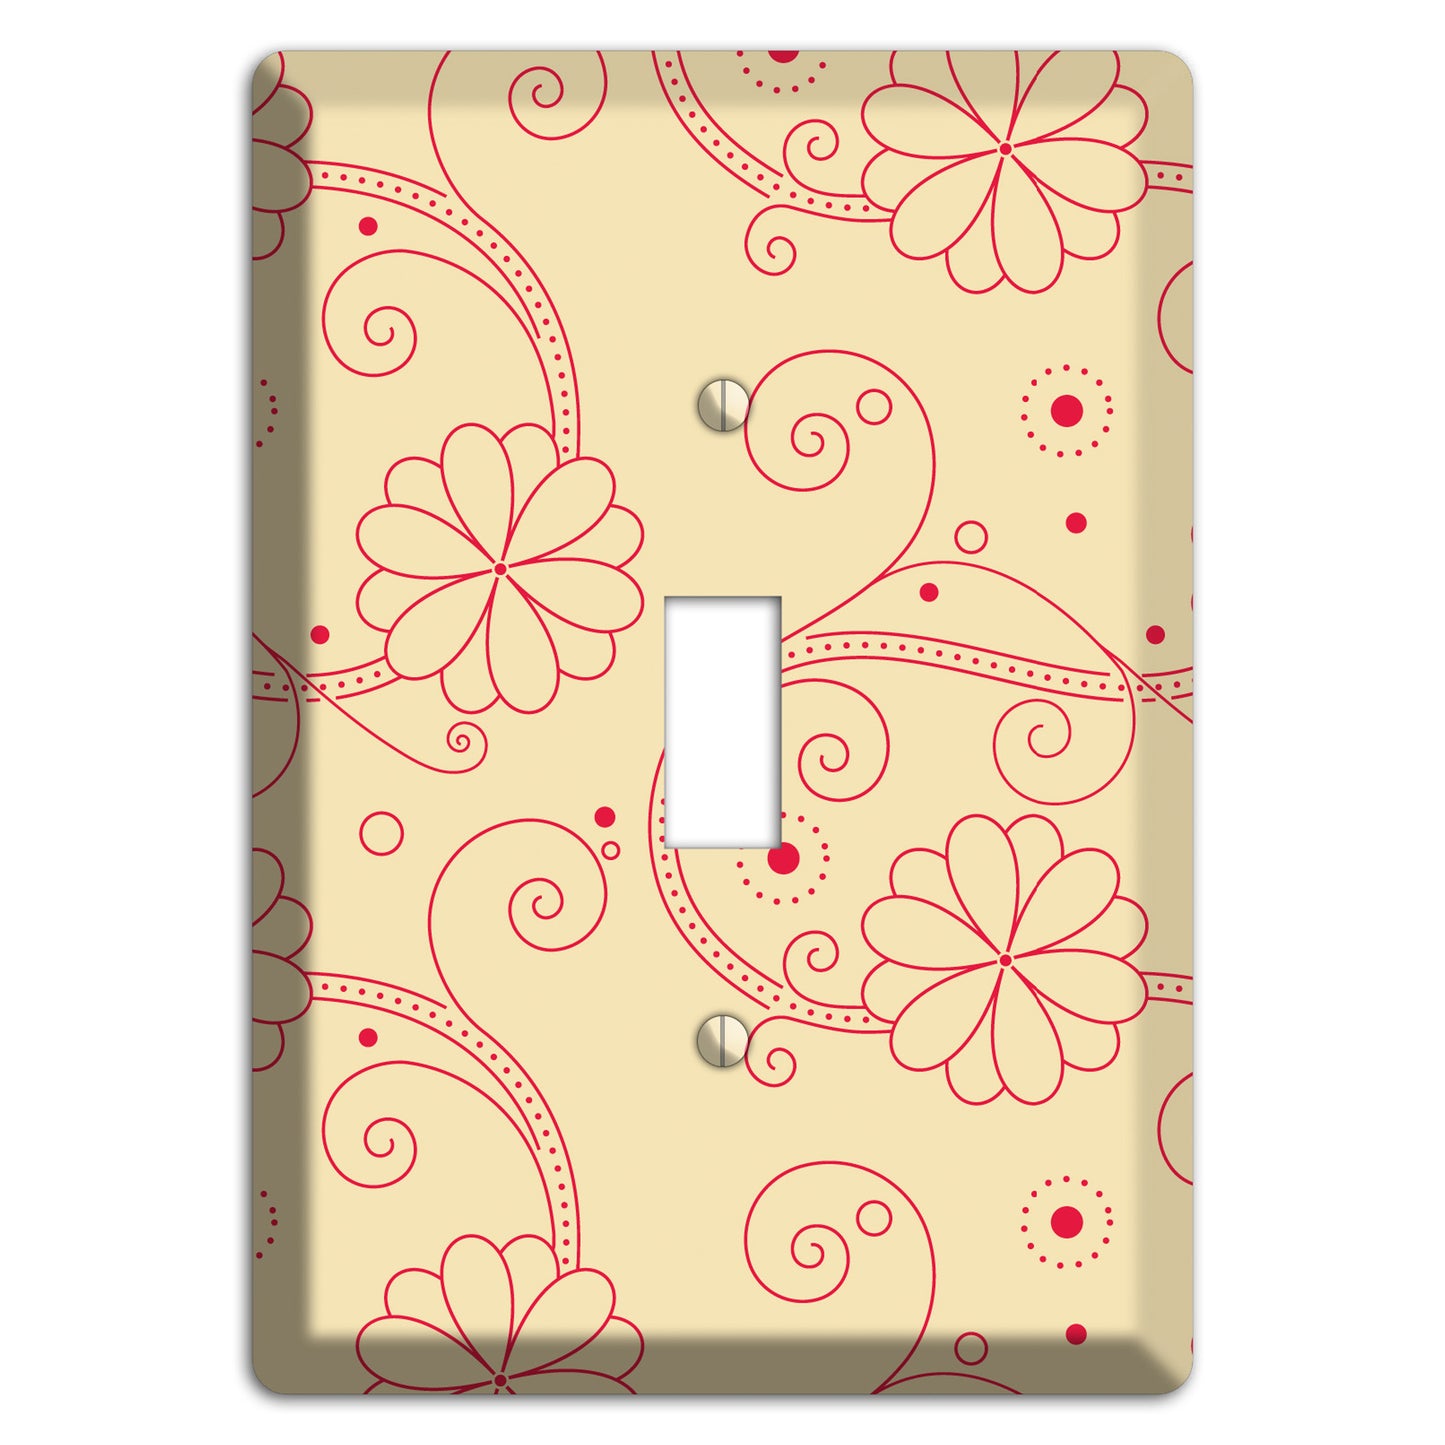 Off White Floral Swirl Cover Plates